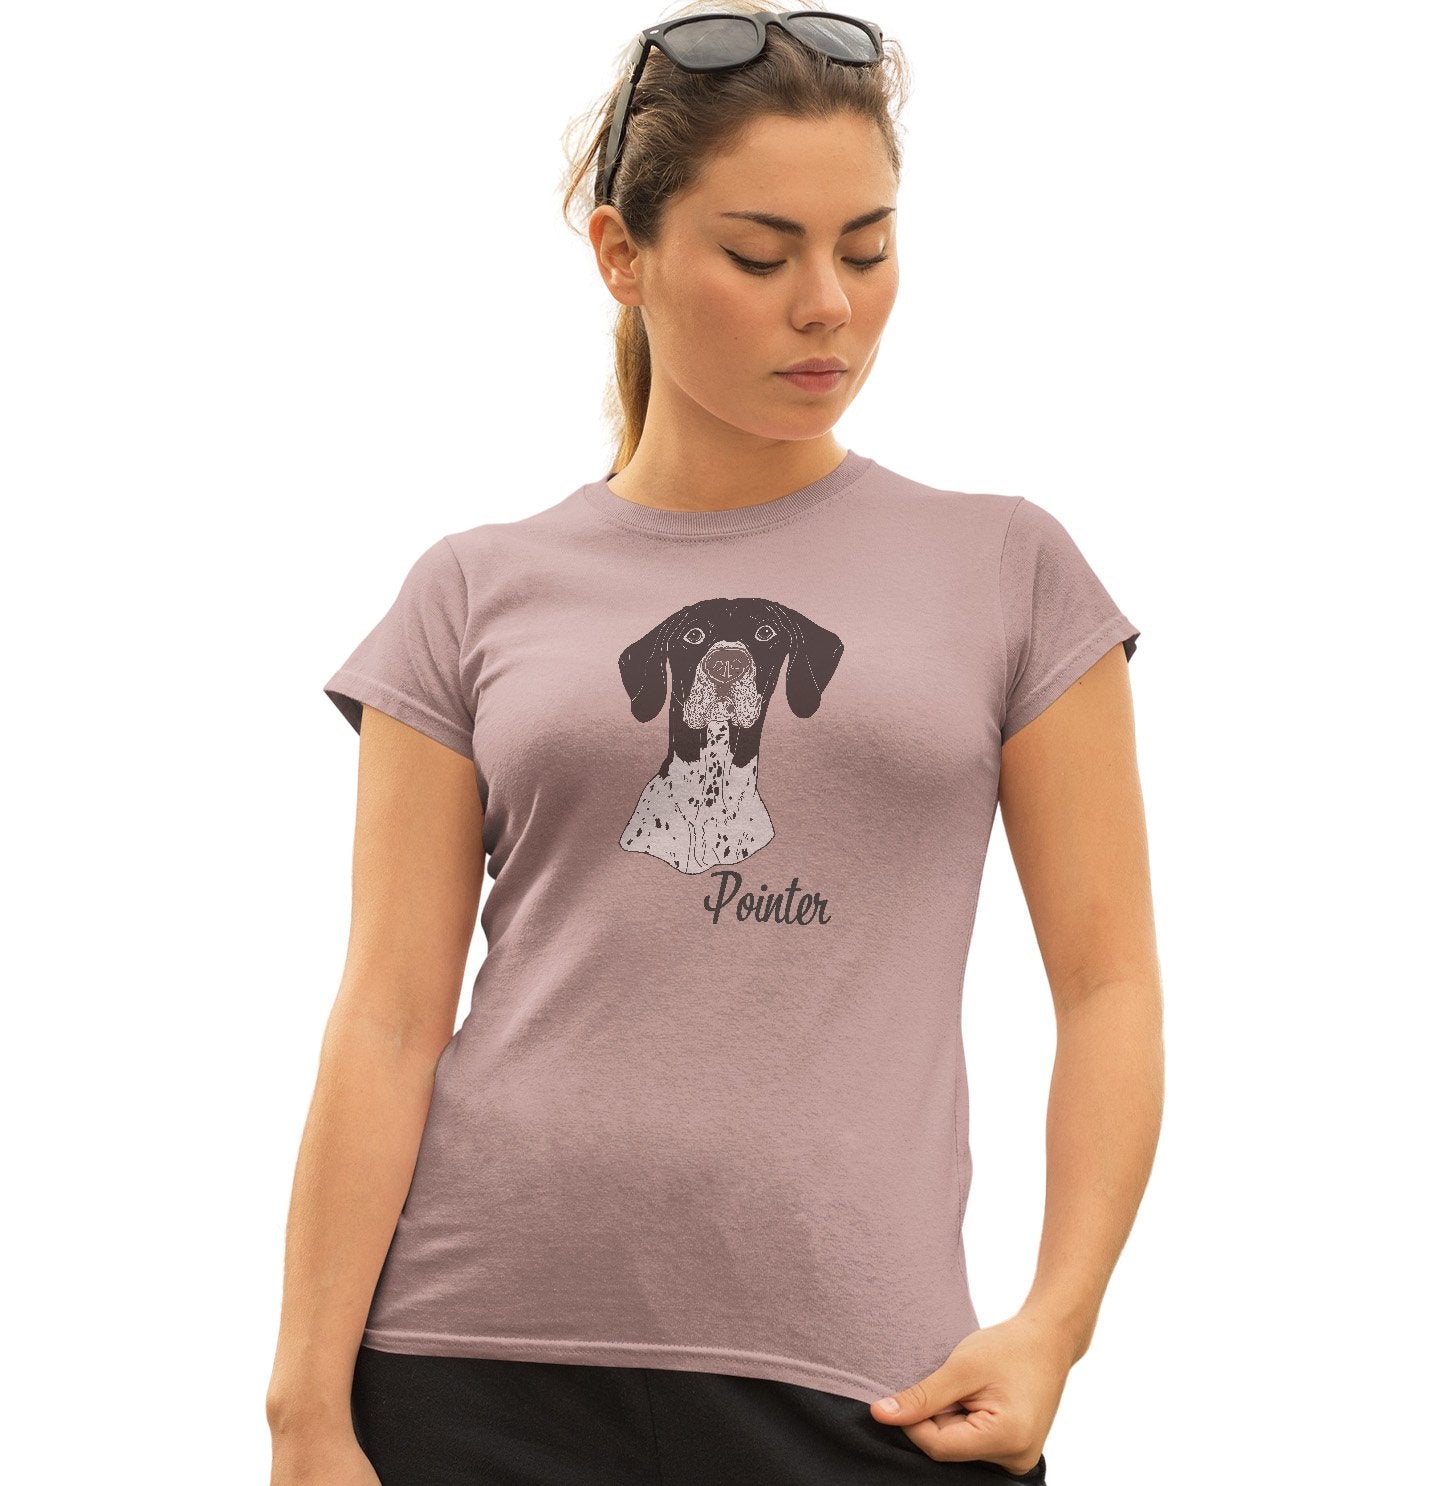 Animal Pride - German Shorthaired Pointer Headshot - Women's Fitted T-Shirt